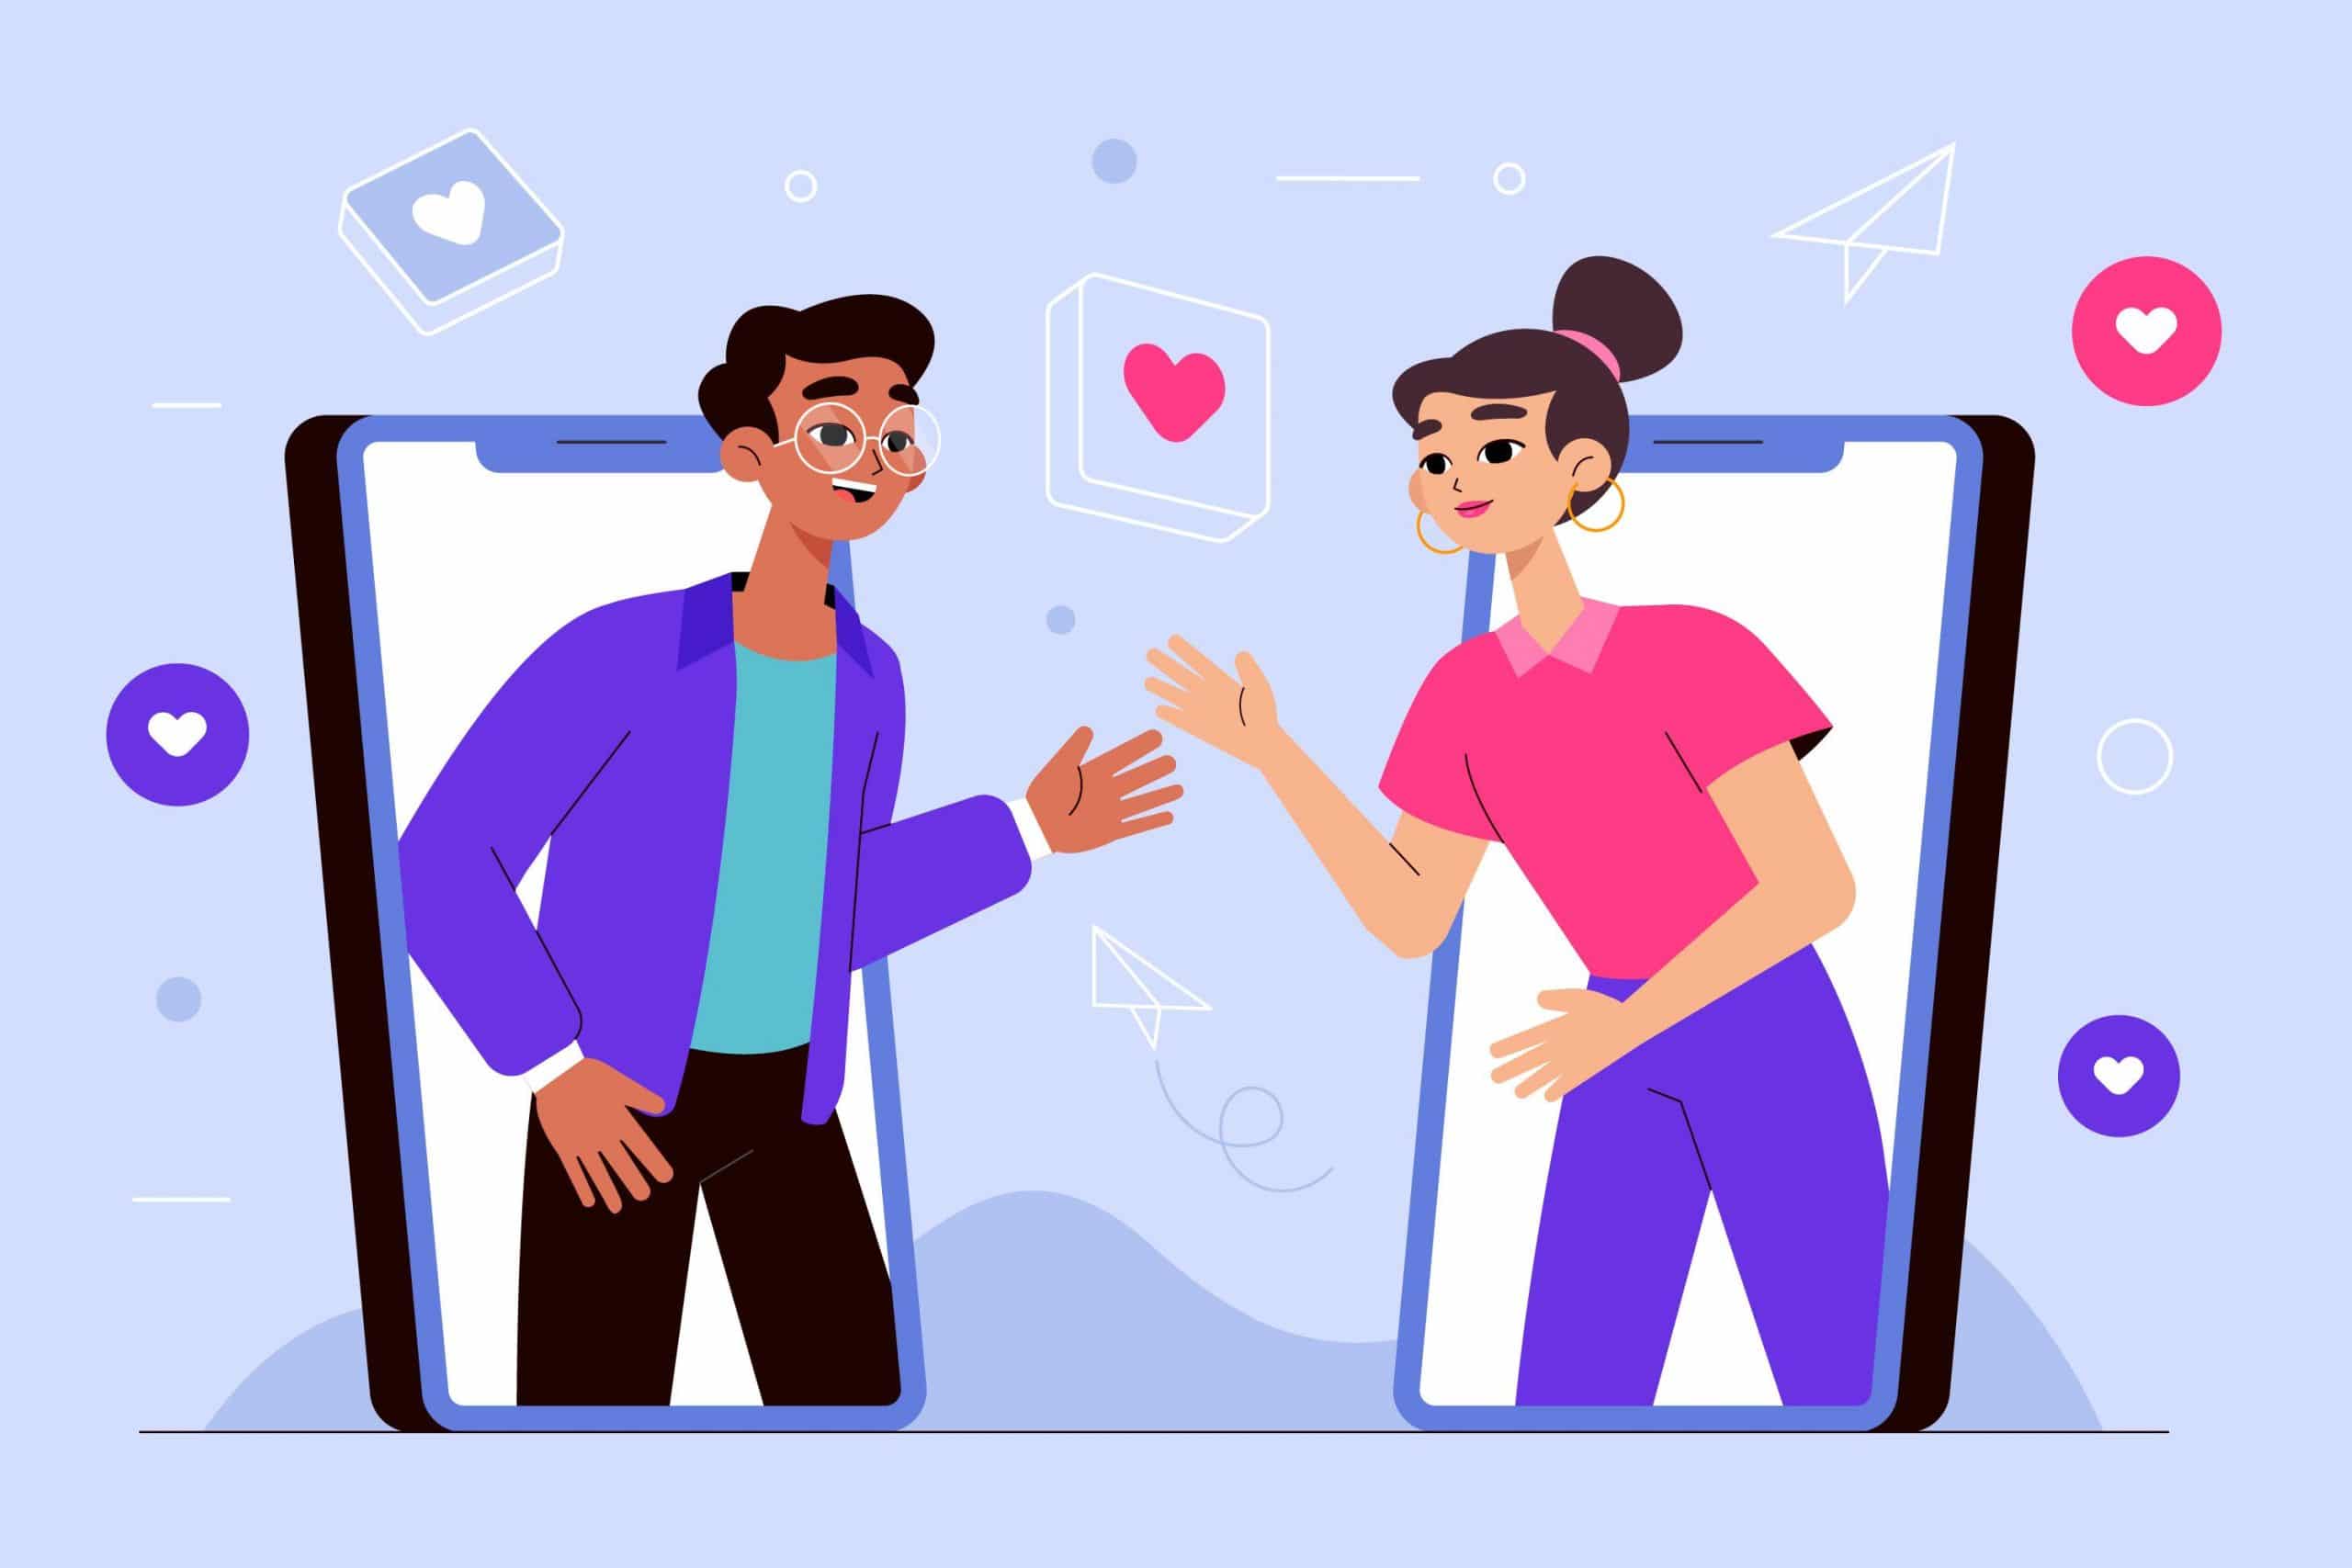 Abstract image showing two characters meeting through virtual dating app